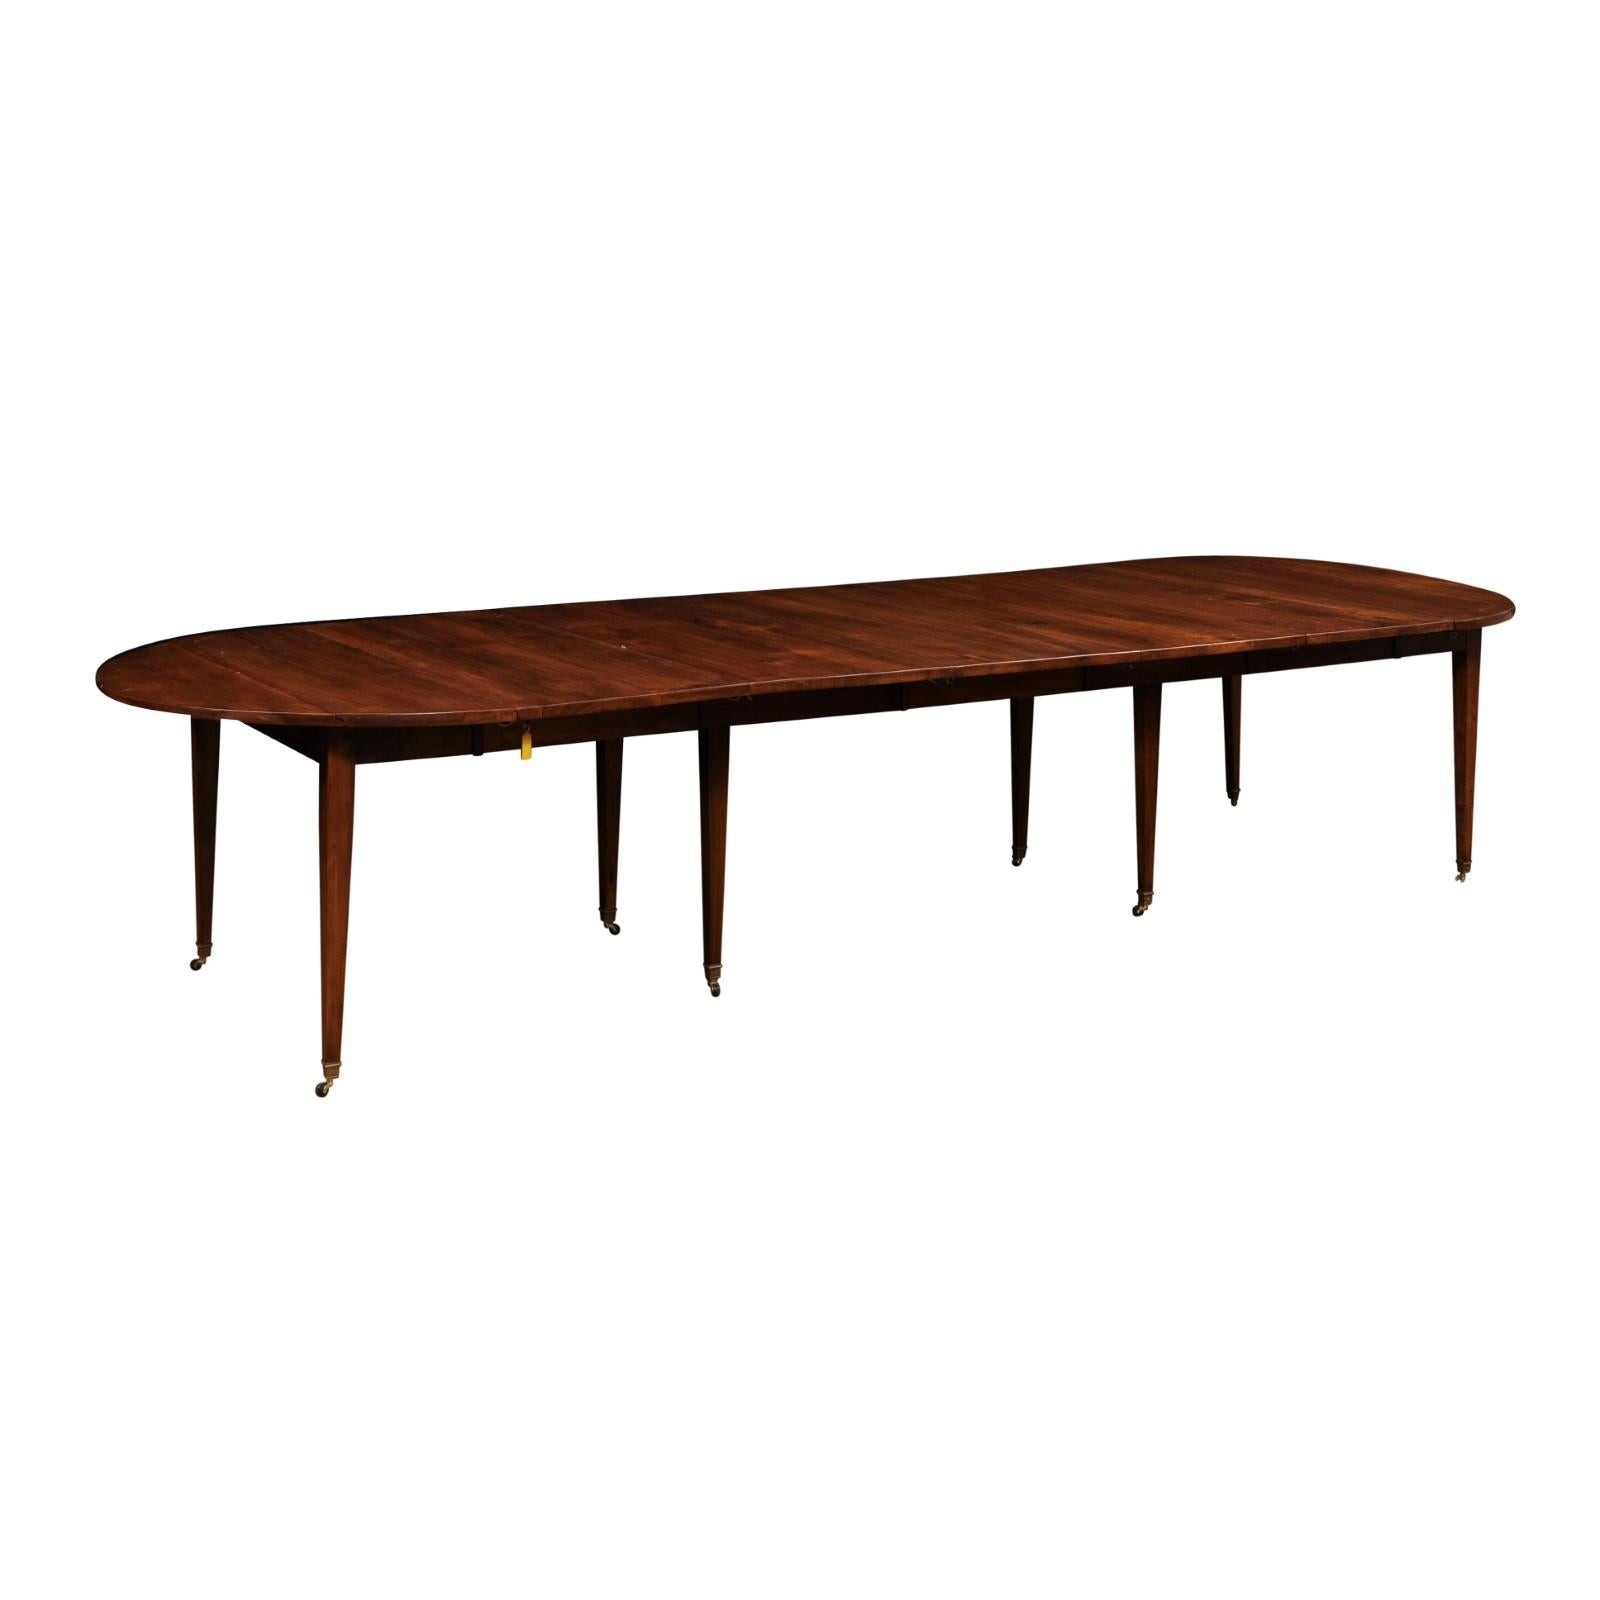 French 1890s Walnut Oval Extension Dining Table with Four Removable Leaves 10